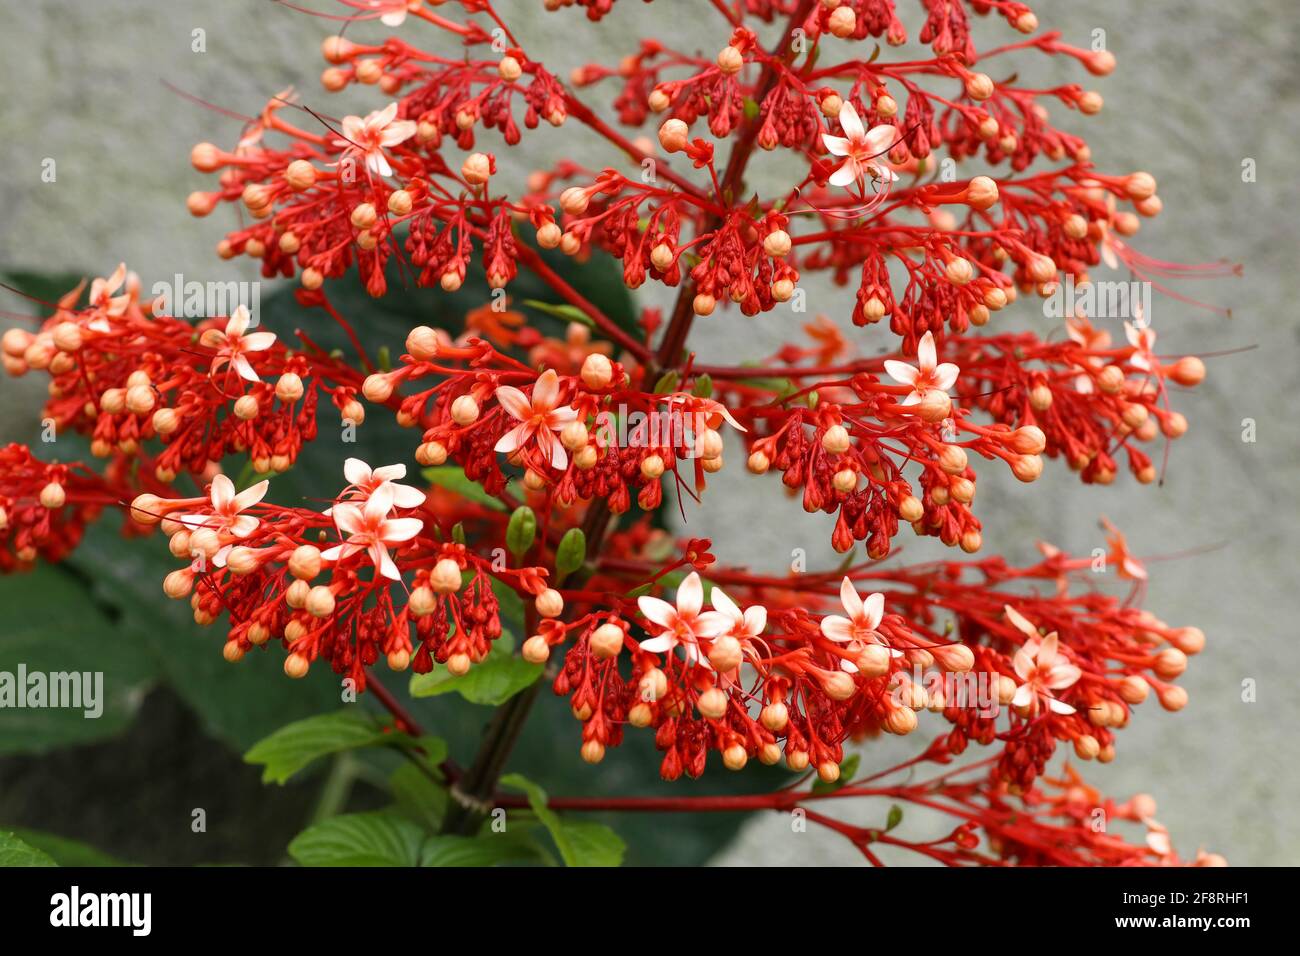 Close up red flowers of Clerodendrum Paniculatum or Pagoda Flower taken in Flores, Indonesia Stock Photo